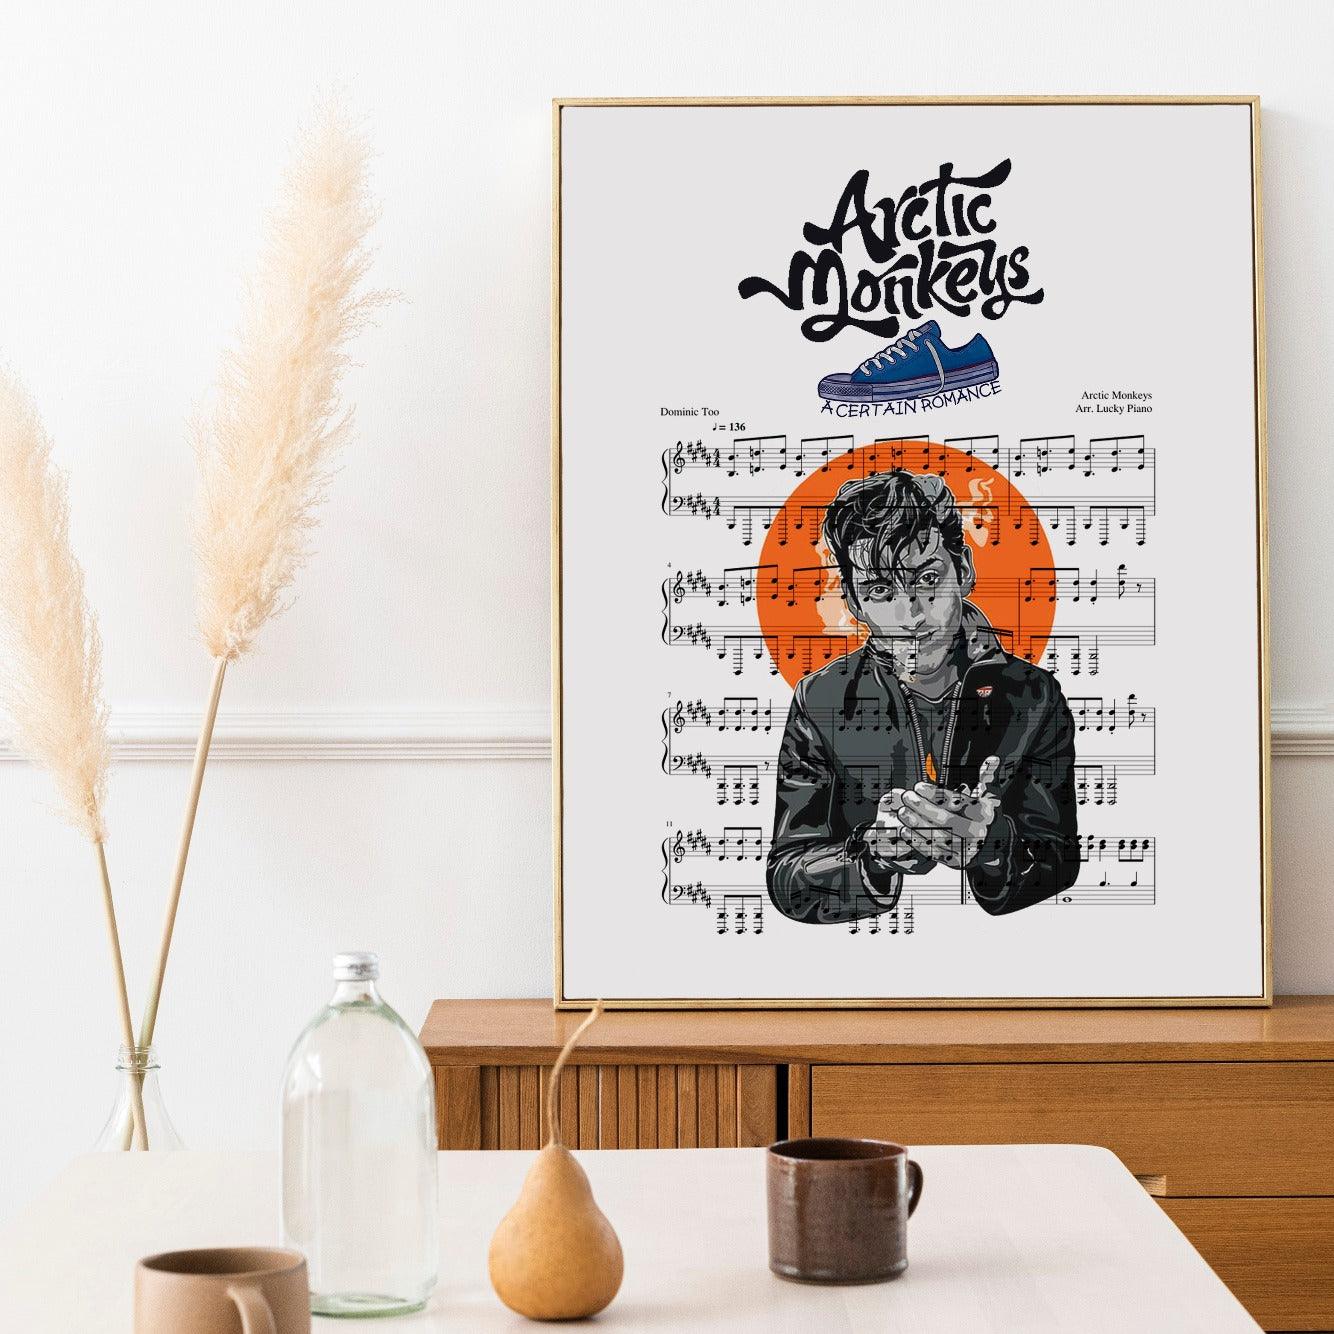 Arctic Monkeys - A Certain Romance Poster | Song Music Sheet Notes Print Everyone has a favorite song especially Arctic monkeys Print, and now you can show the score as printed staff. The personal favorite song sheet print shows the song chosen as the score. 